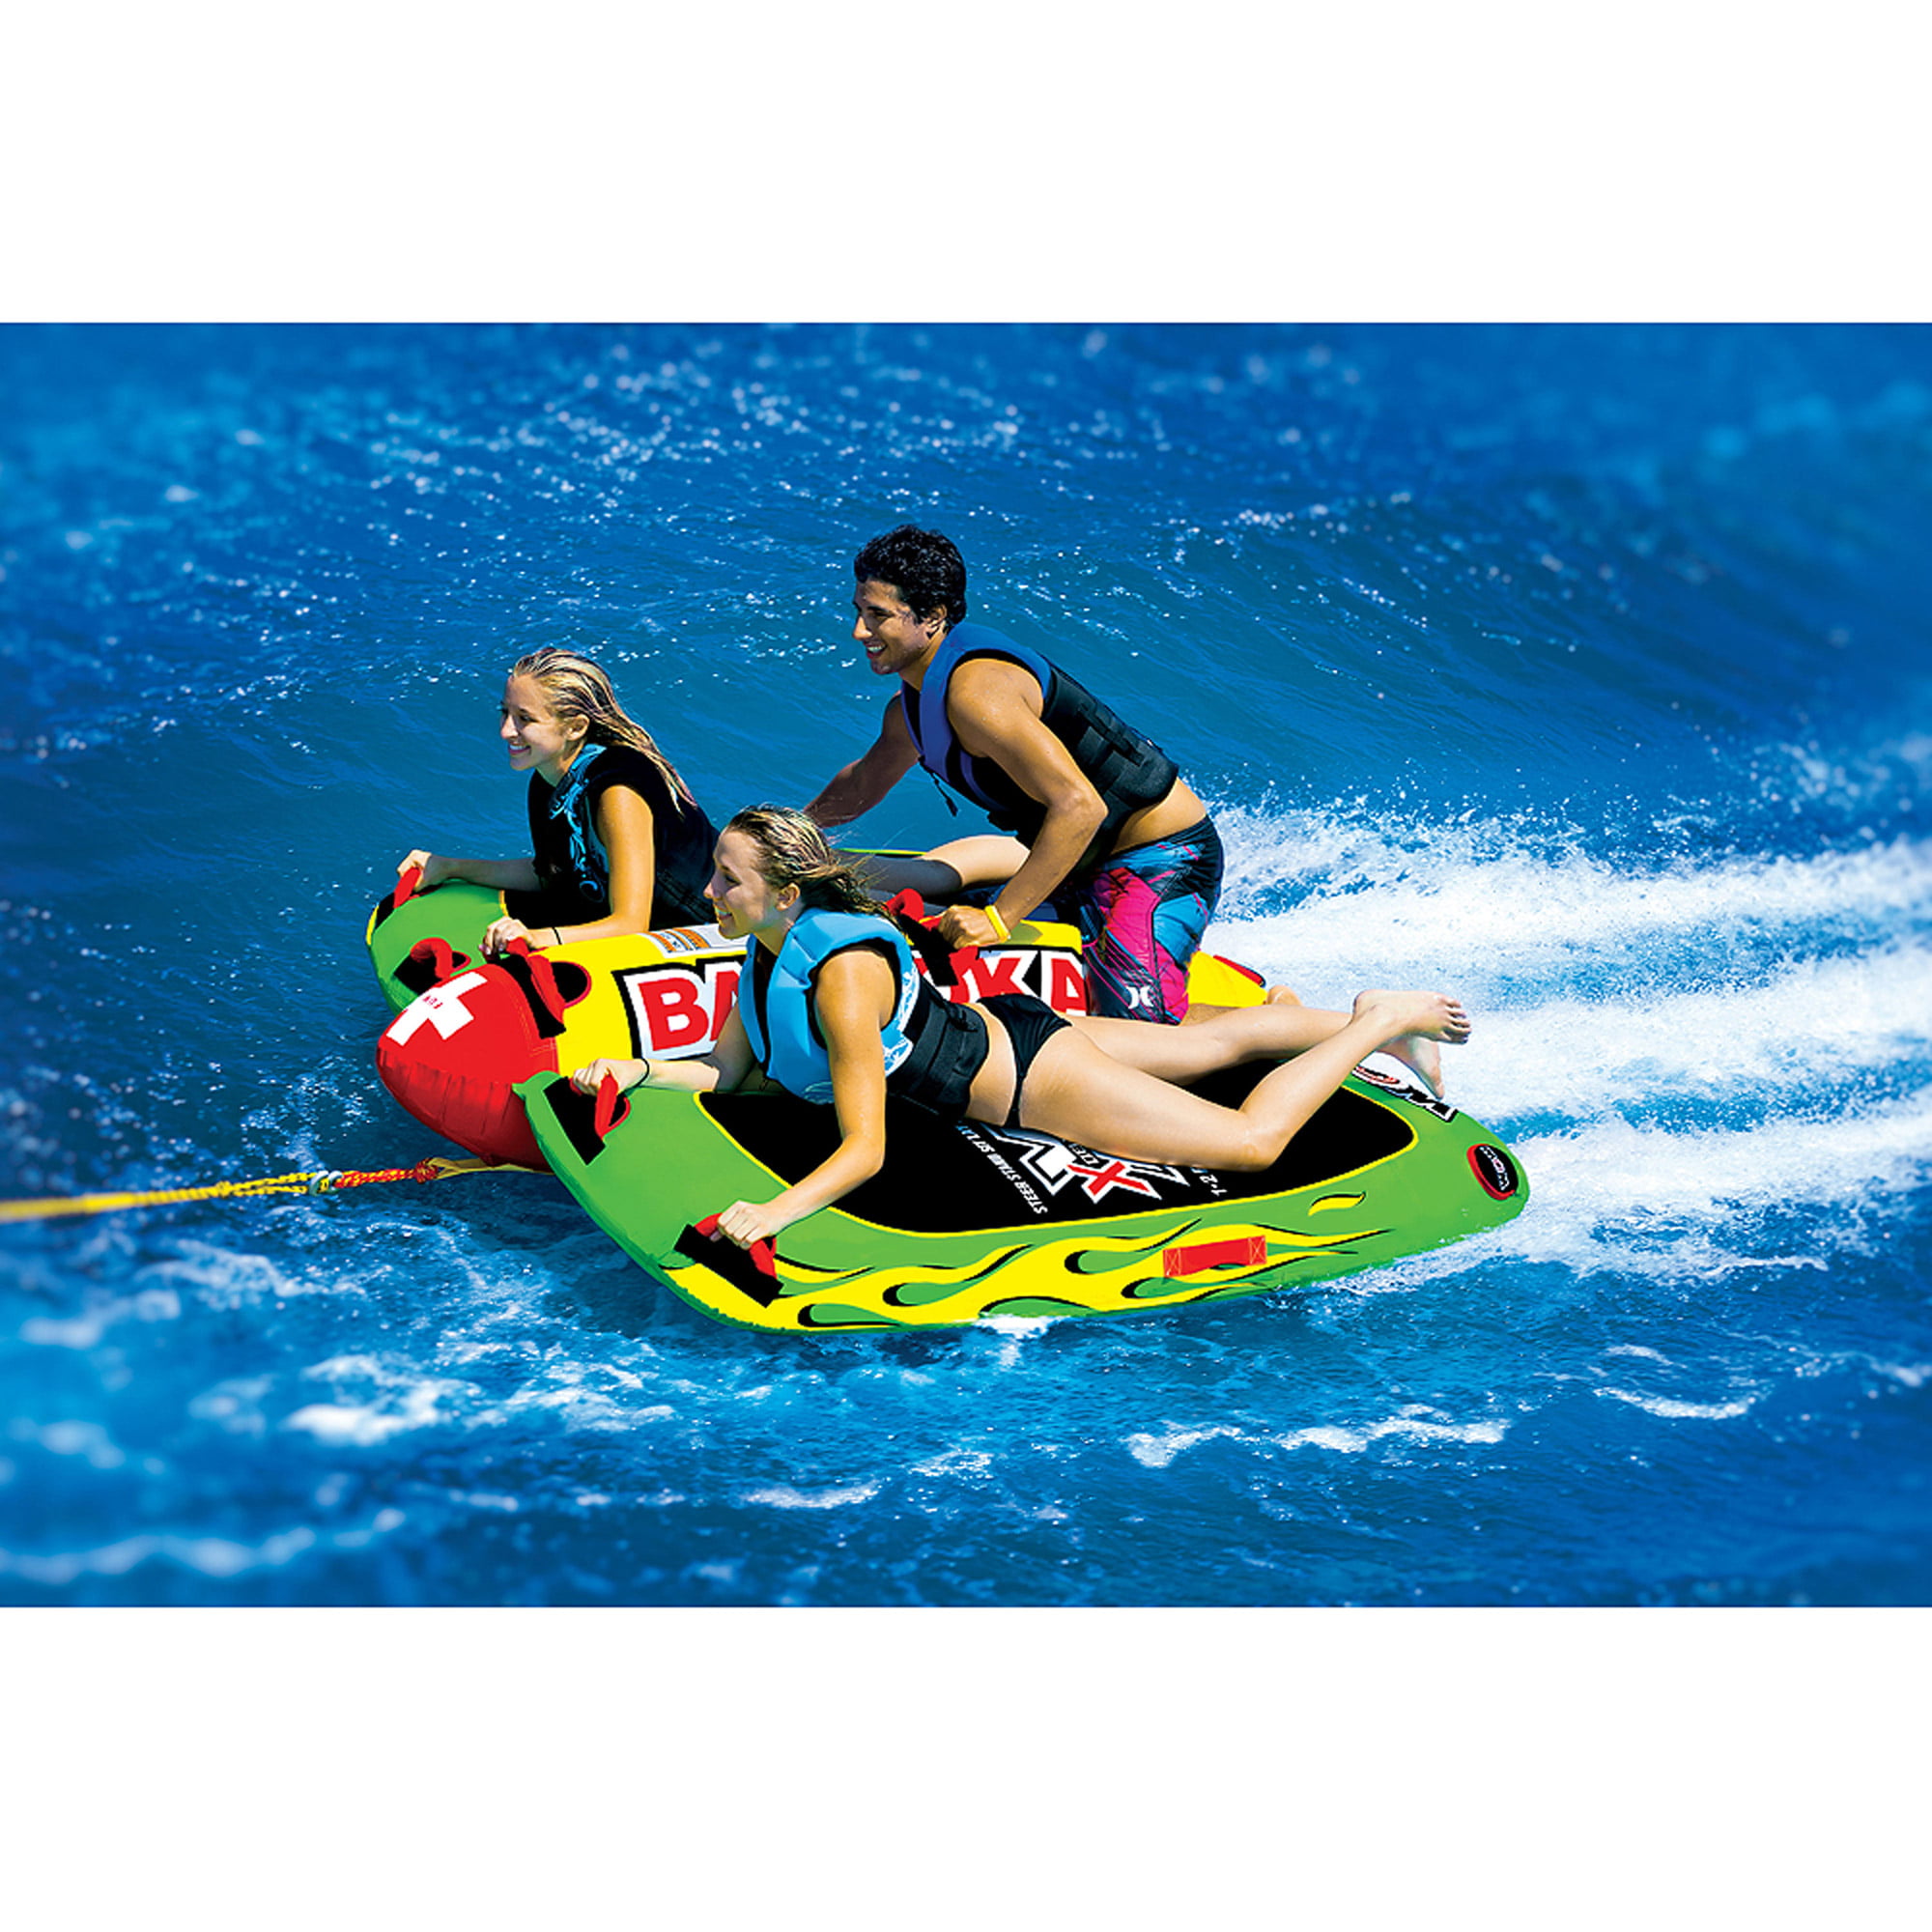 Airhead Hot Dog 1 to 3 Rider Inflatable Waterskiing Towable Tube -  Walmart.com